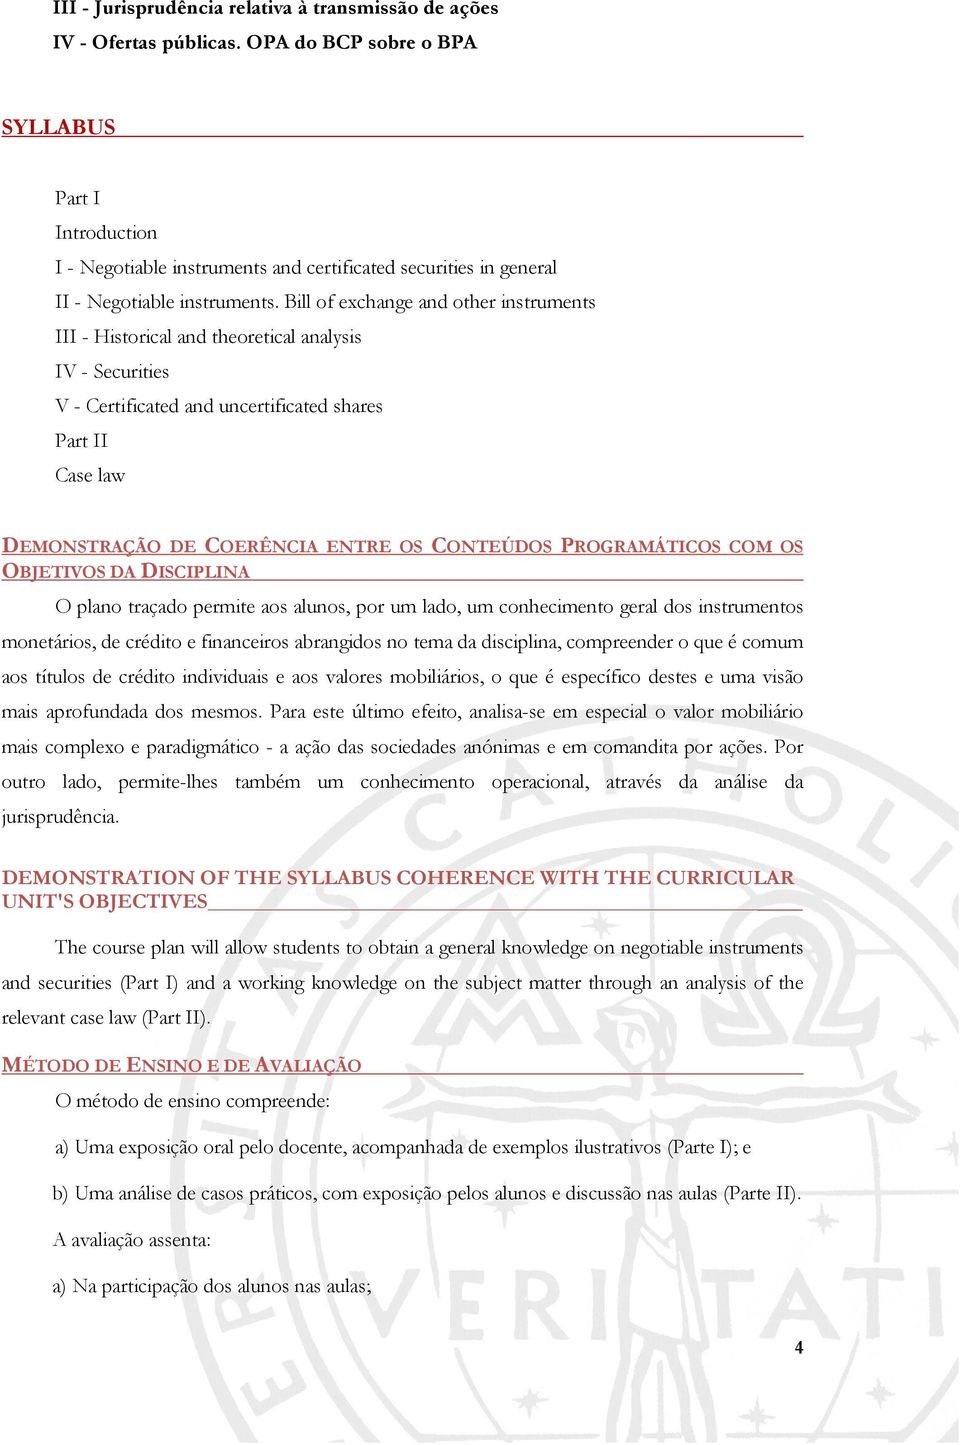 Bill of exchange and other instruments III - Historical and theoretical analysis IV - Securities V - Certificated and uncertificated shares Part II Case law DEMONSTRAÇÃO DE COERÊNCIA ENTRE OS